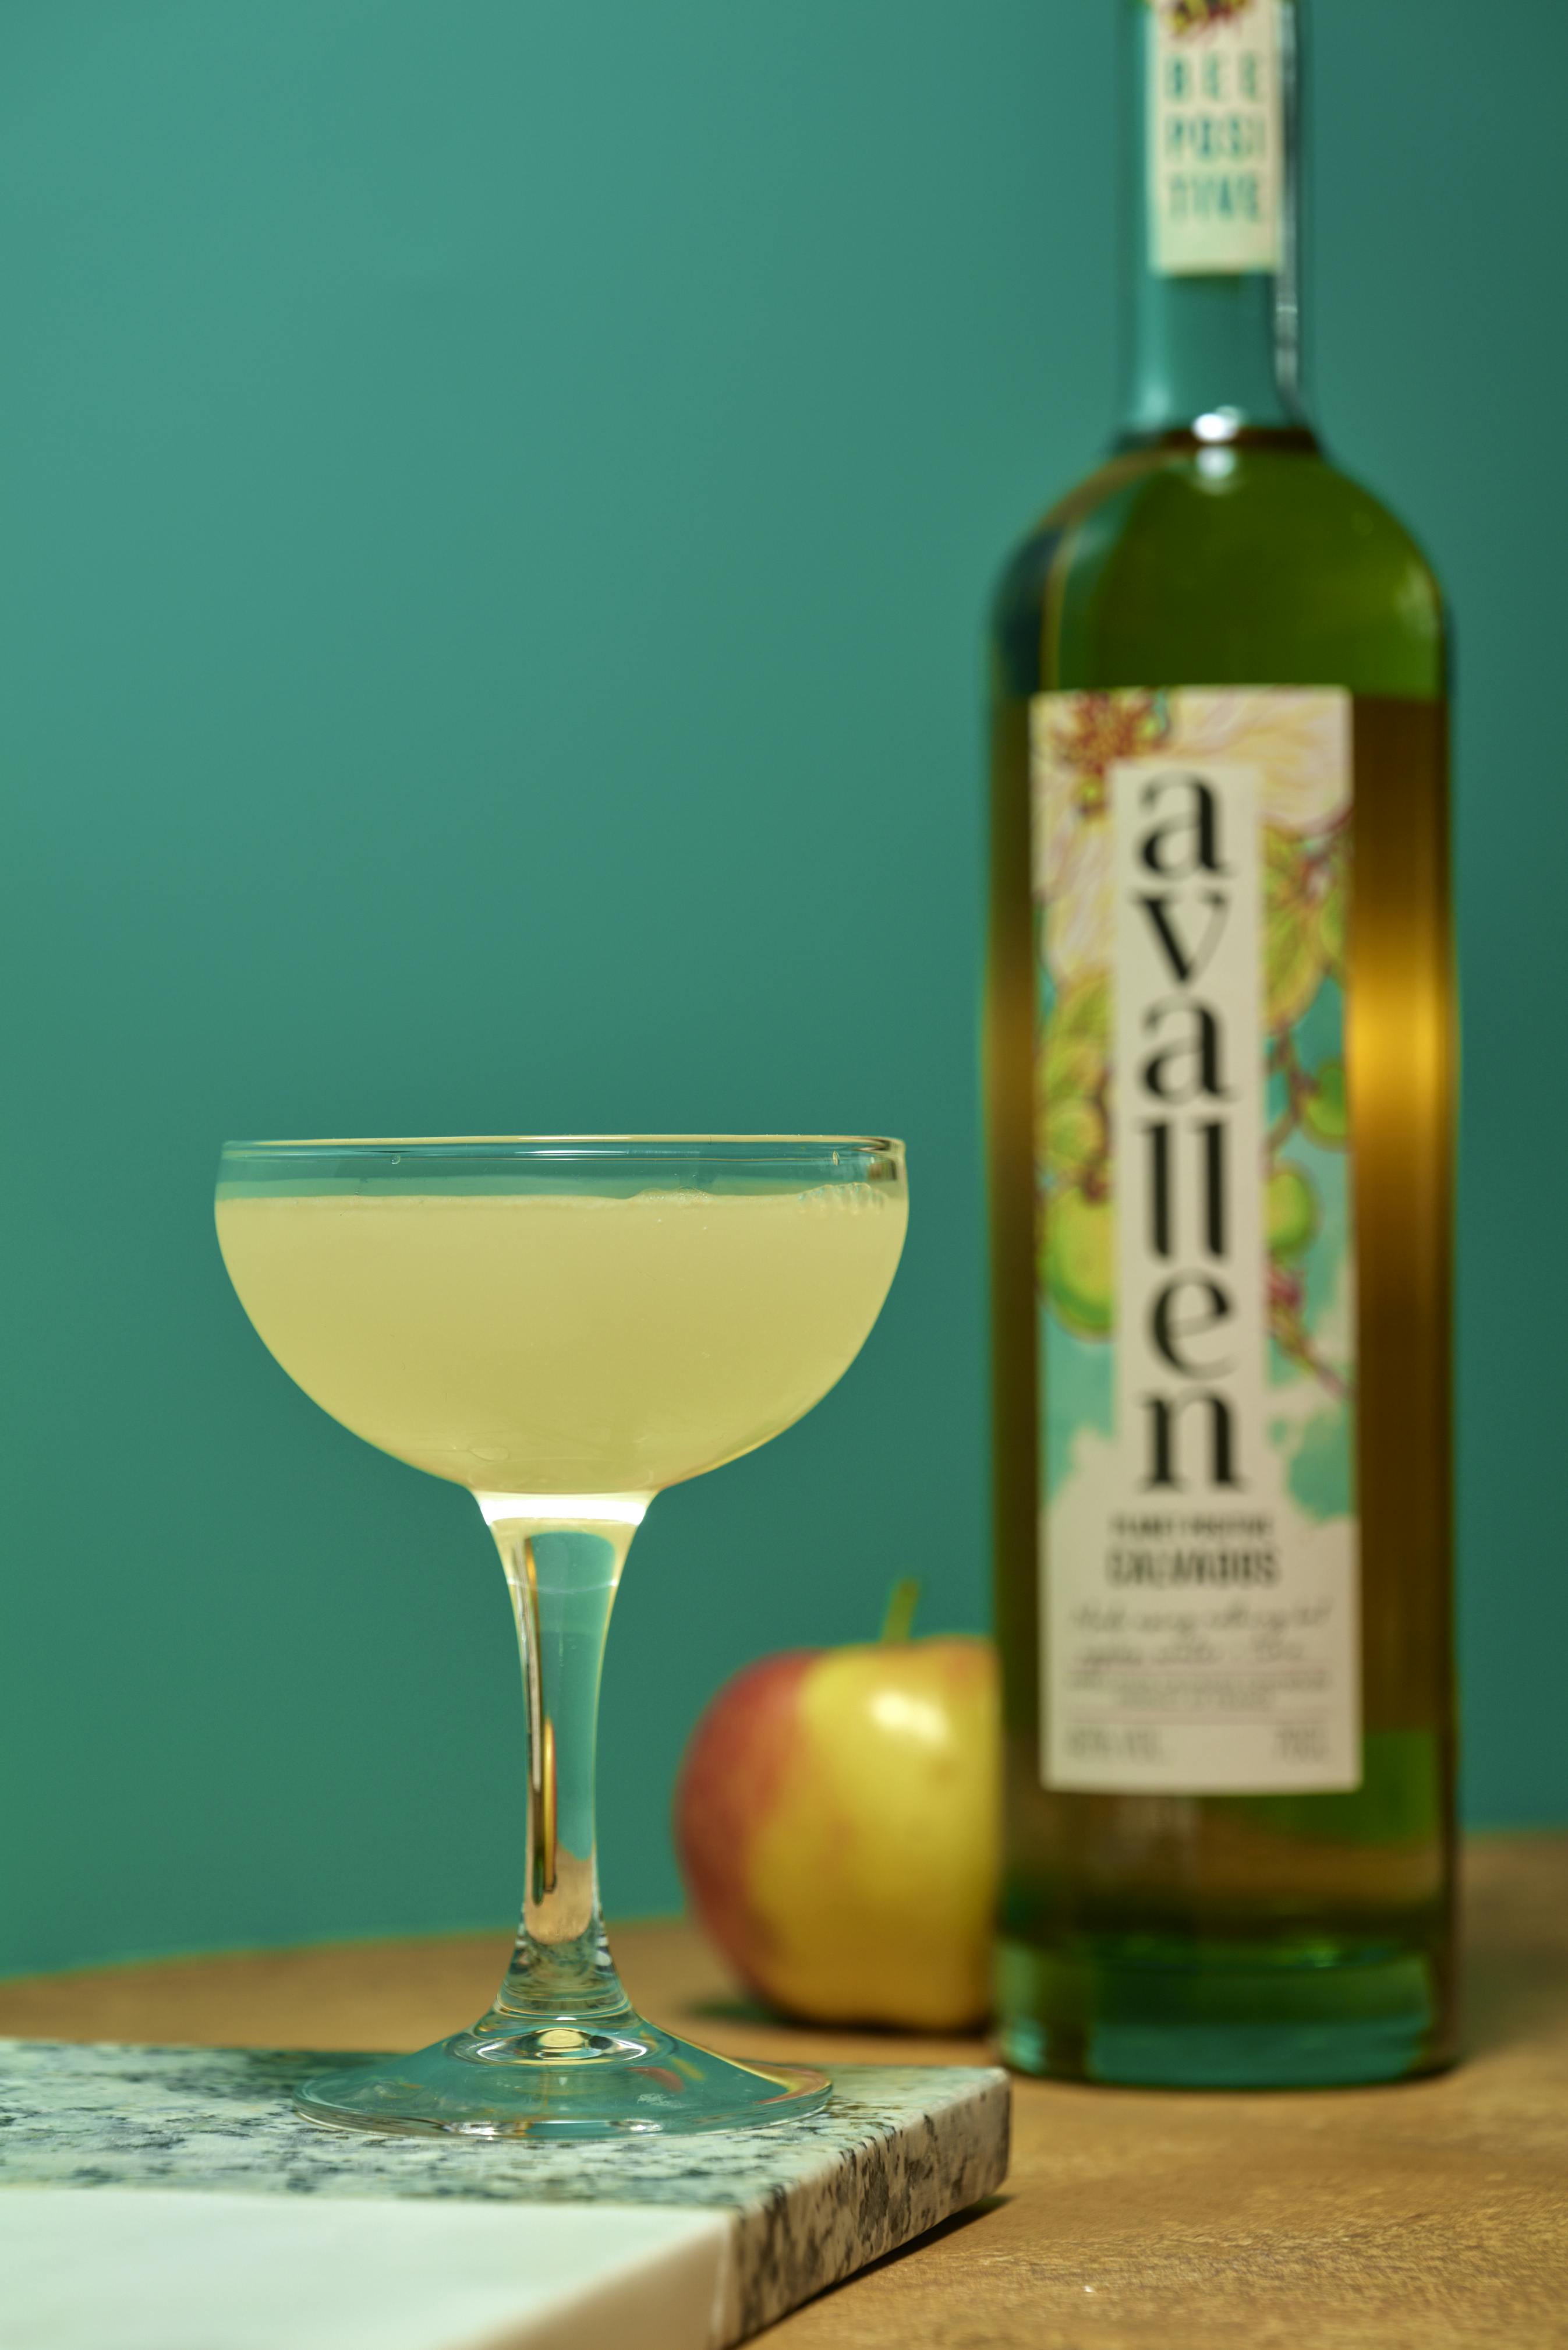 An appletini cocktail in a coupe glass with a bottle of Avallen calvados and an apple